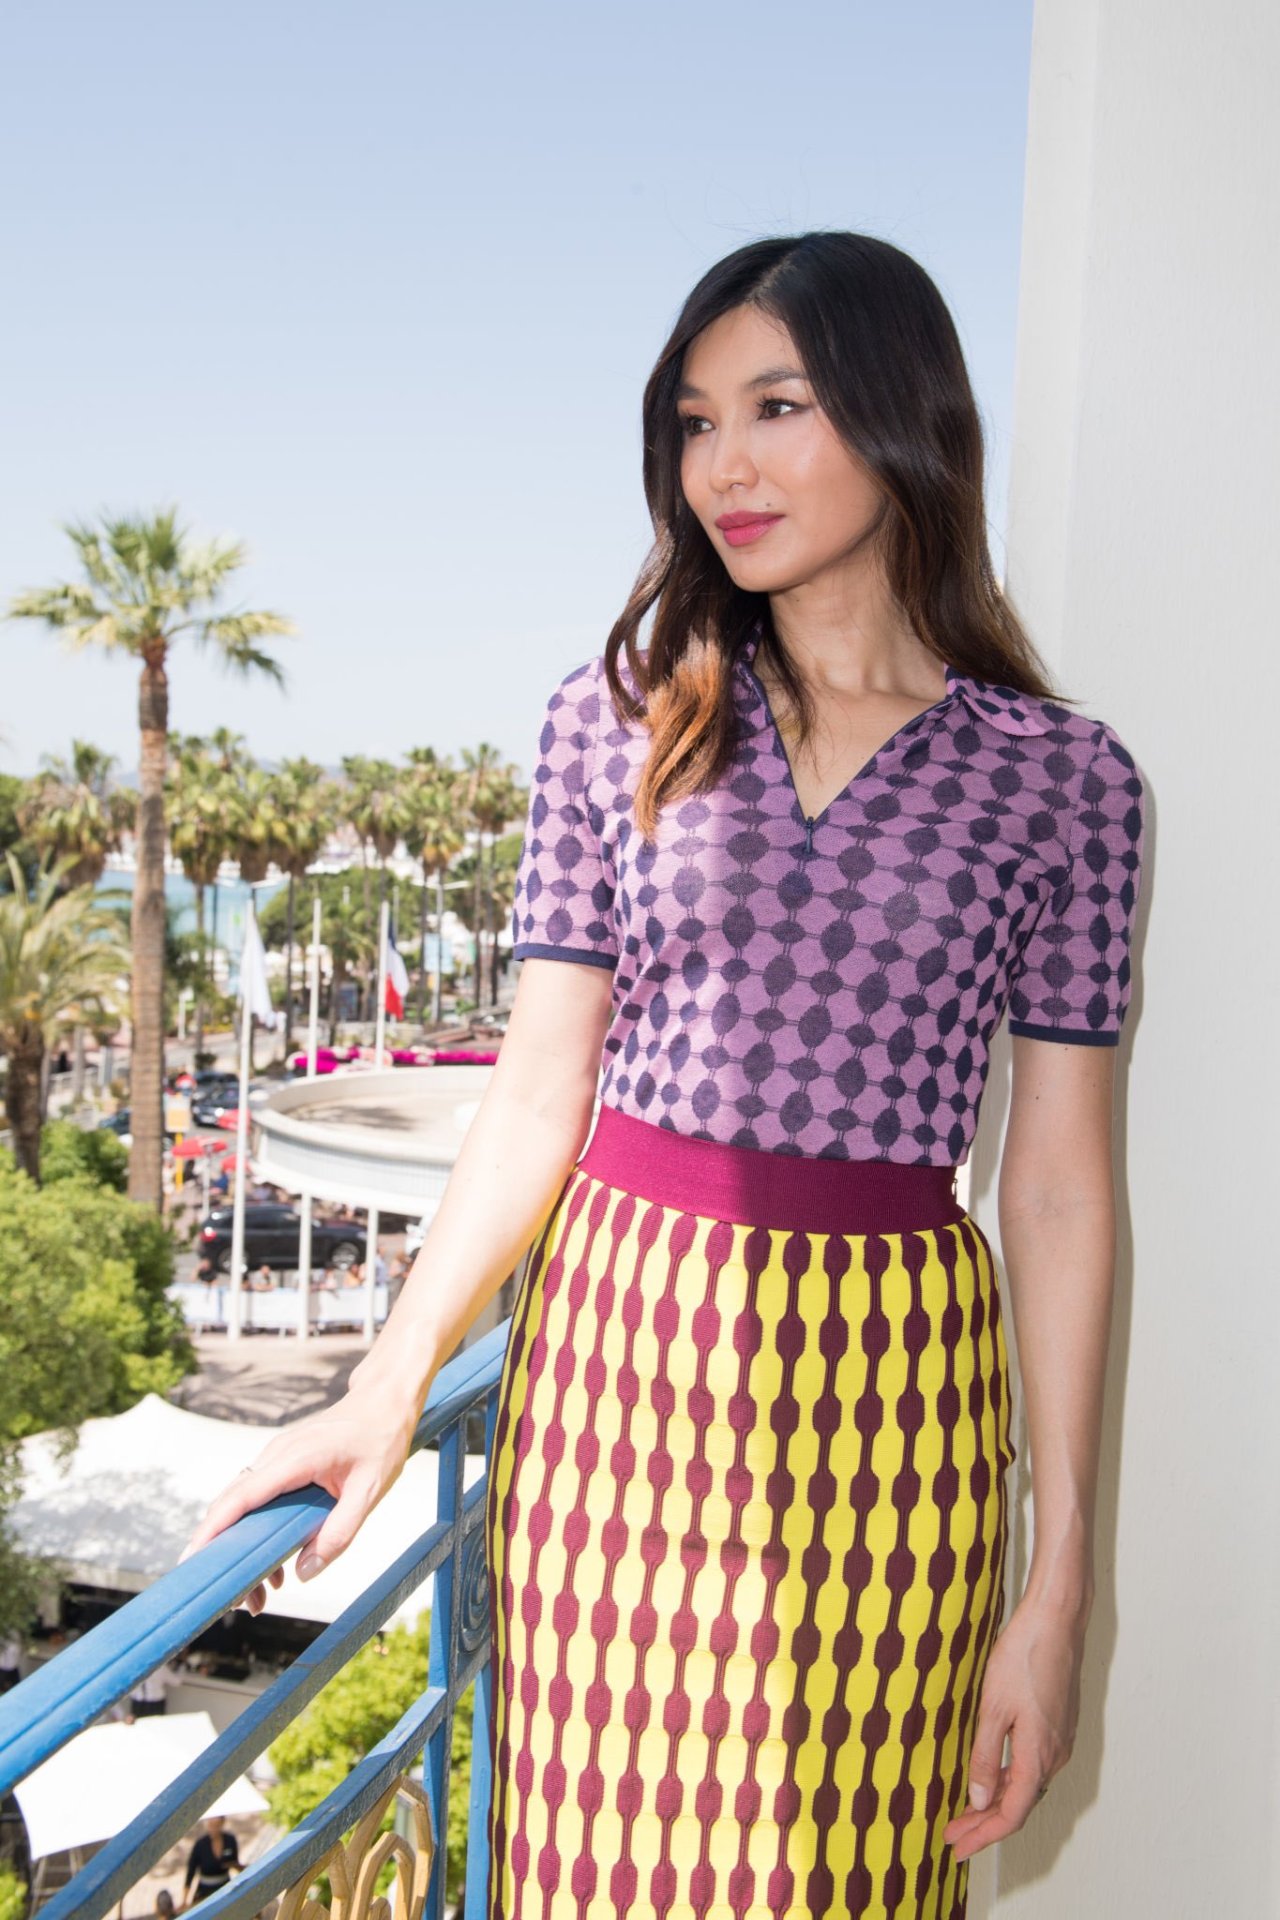 Gemma Chan at the 2022 Cannes Film Festival #gemma chan #shes so pretty but i hate this outfit #cannes#cannes 2022